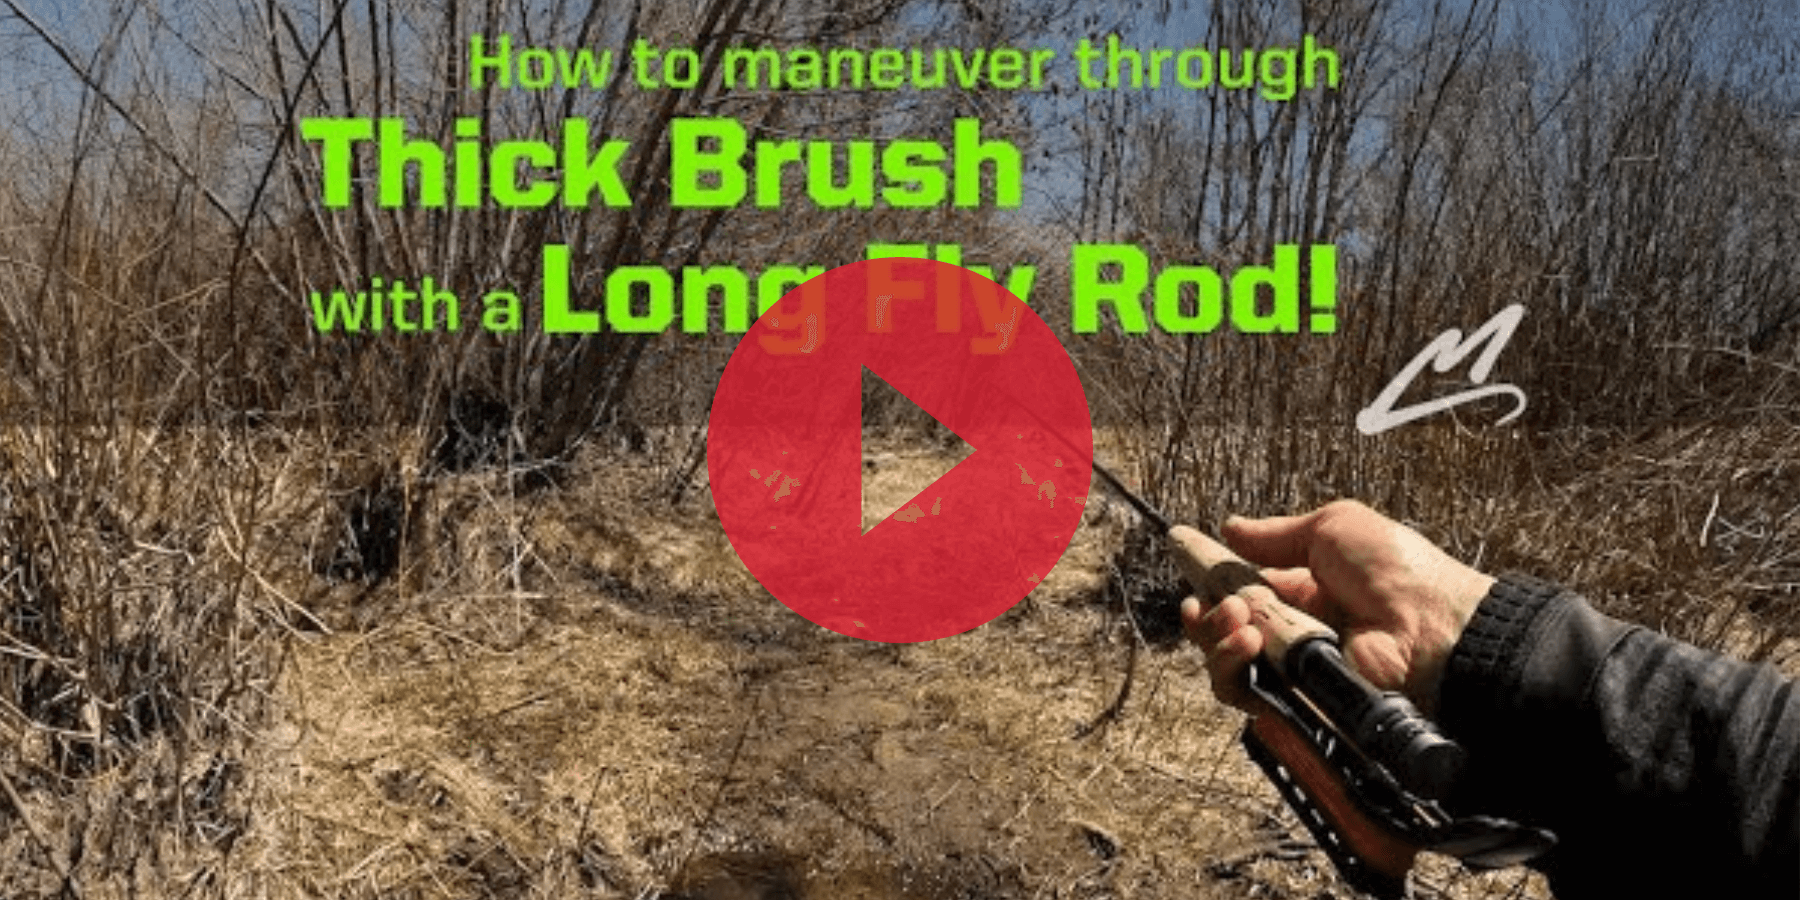 How to Maneuver a Fly Rod on Brushy Trails